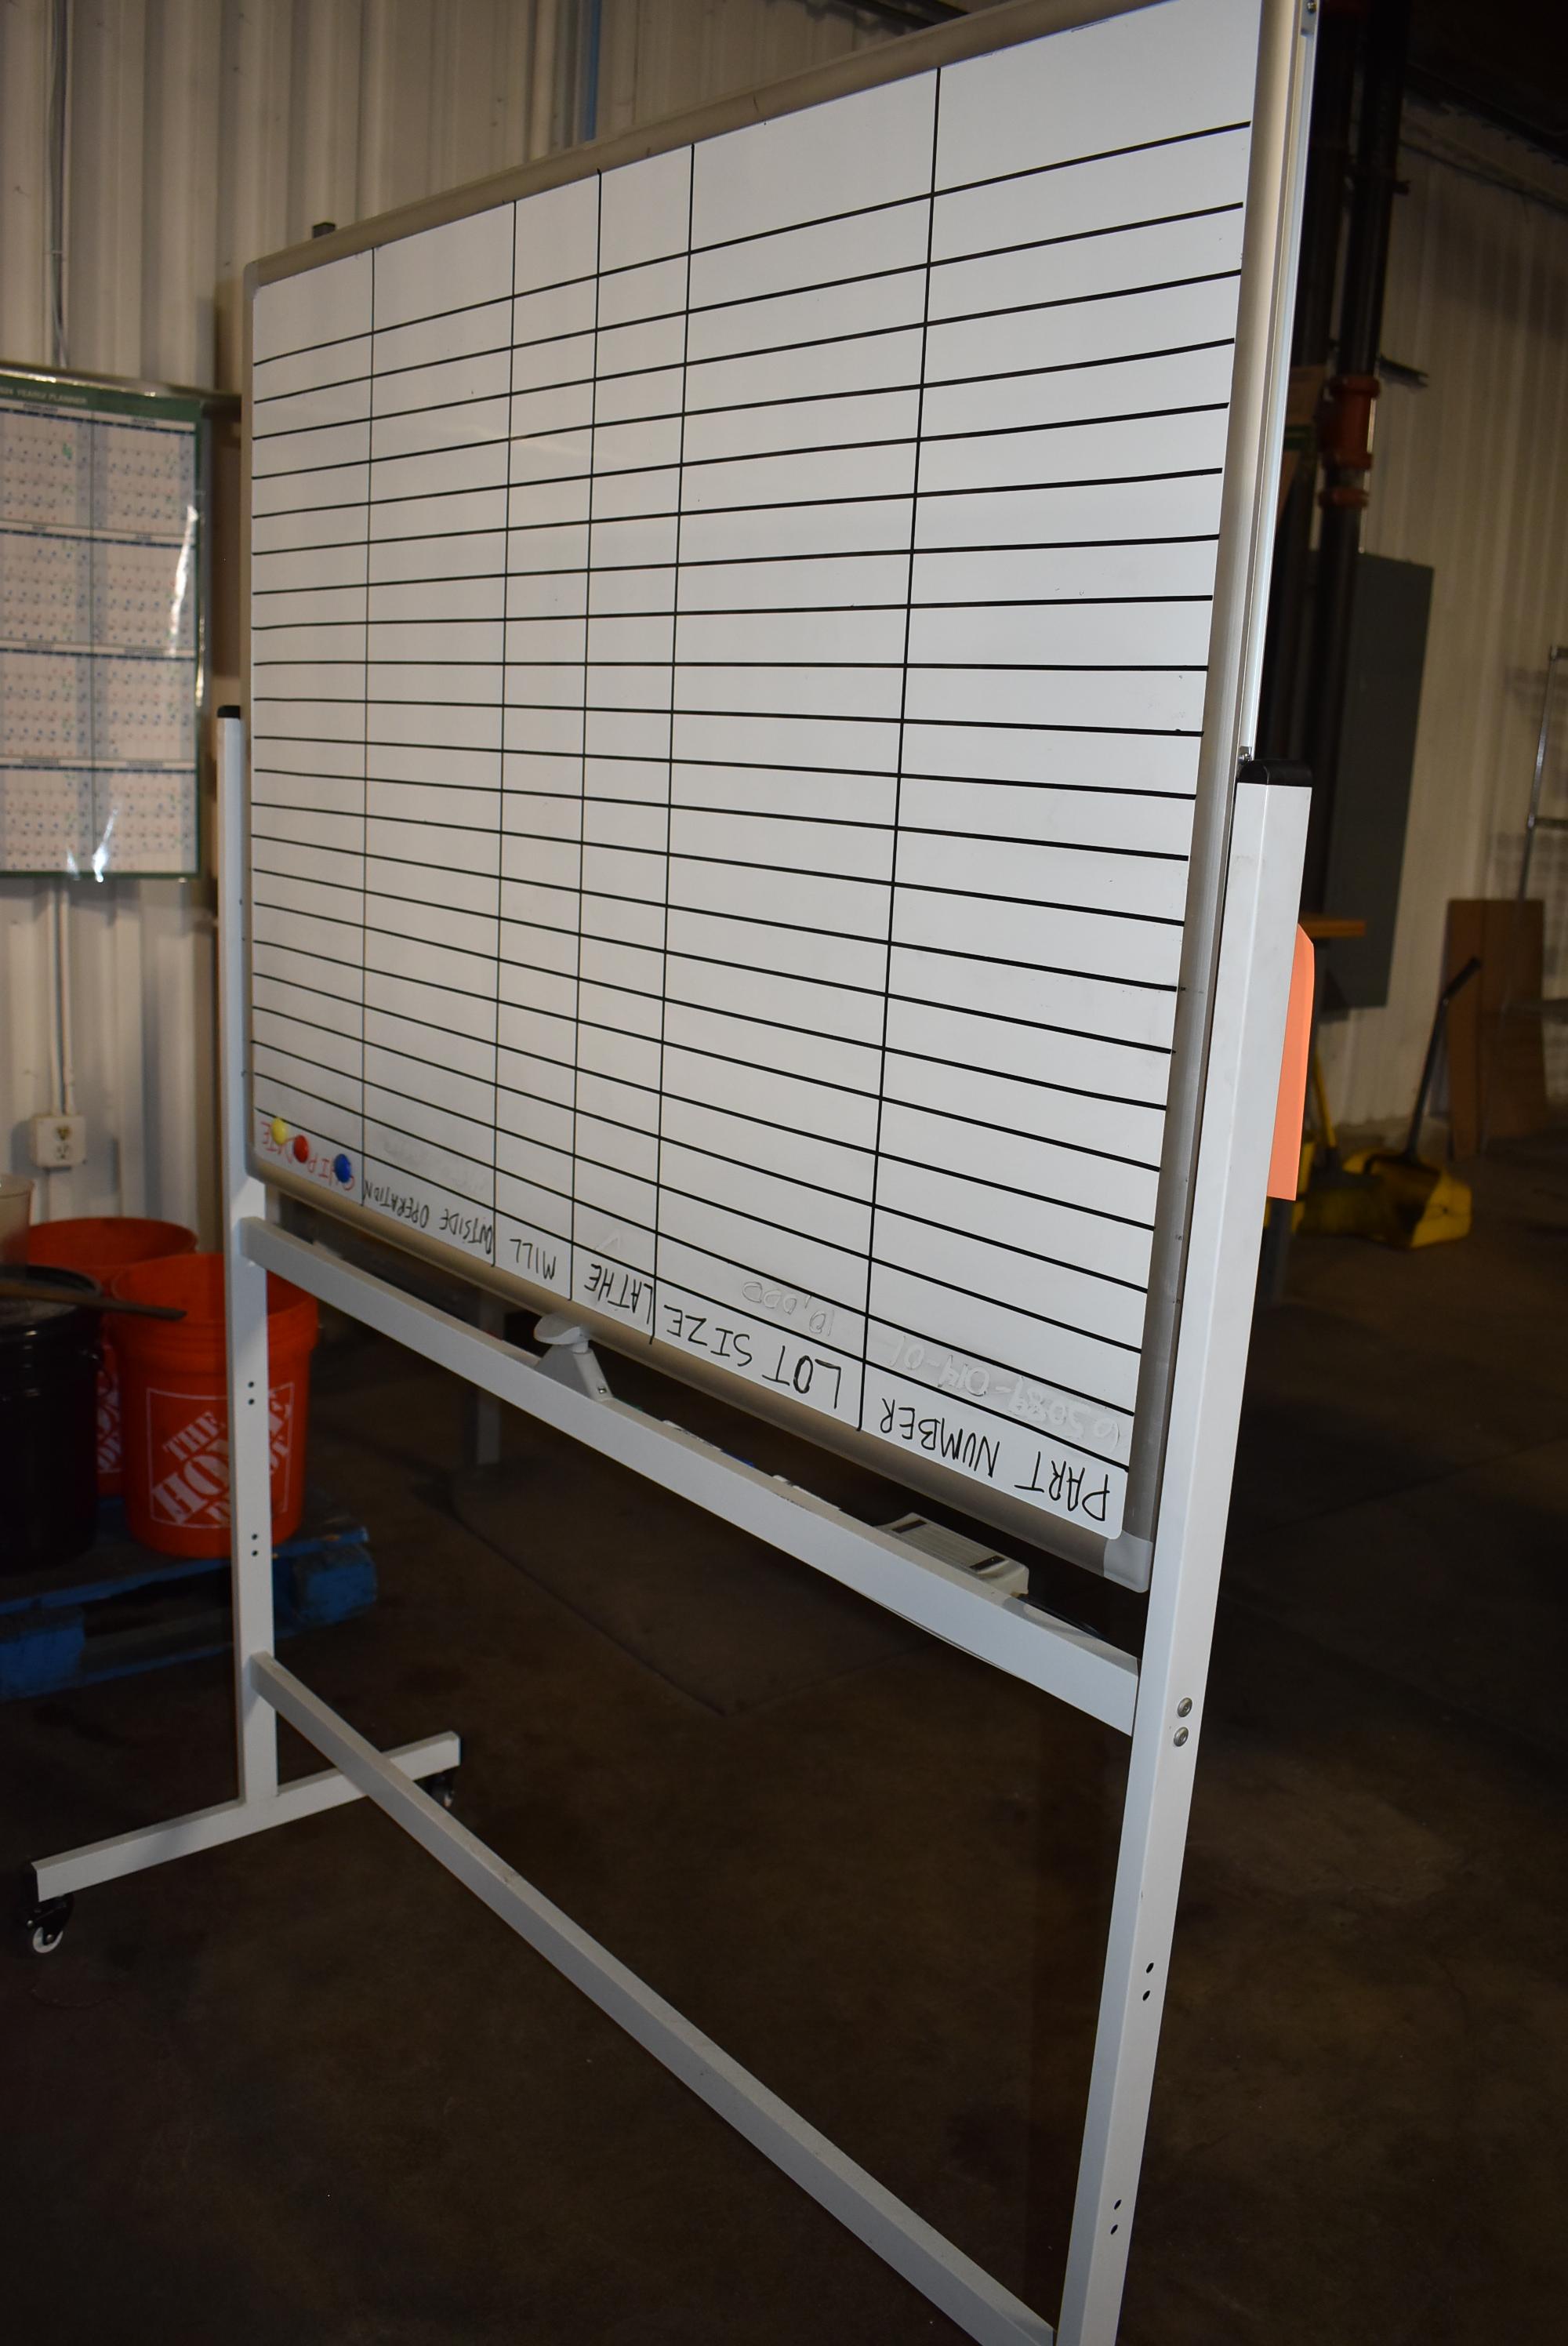 WHITE ERASE BOARD ON PORTABLE STAND WITH MARKERS AND